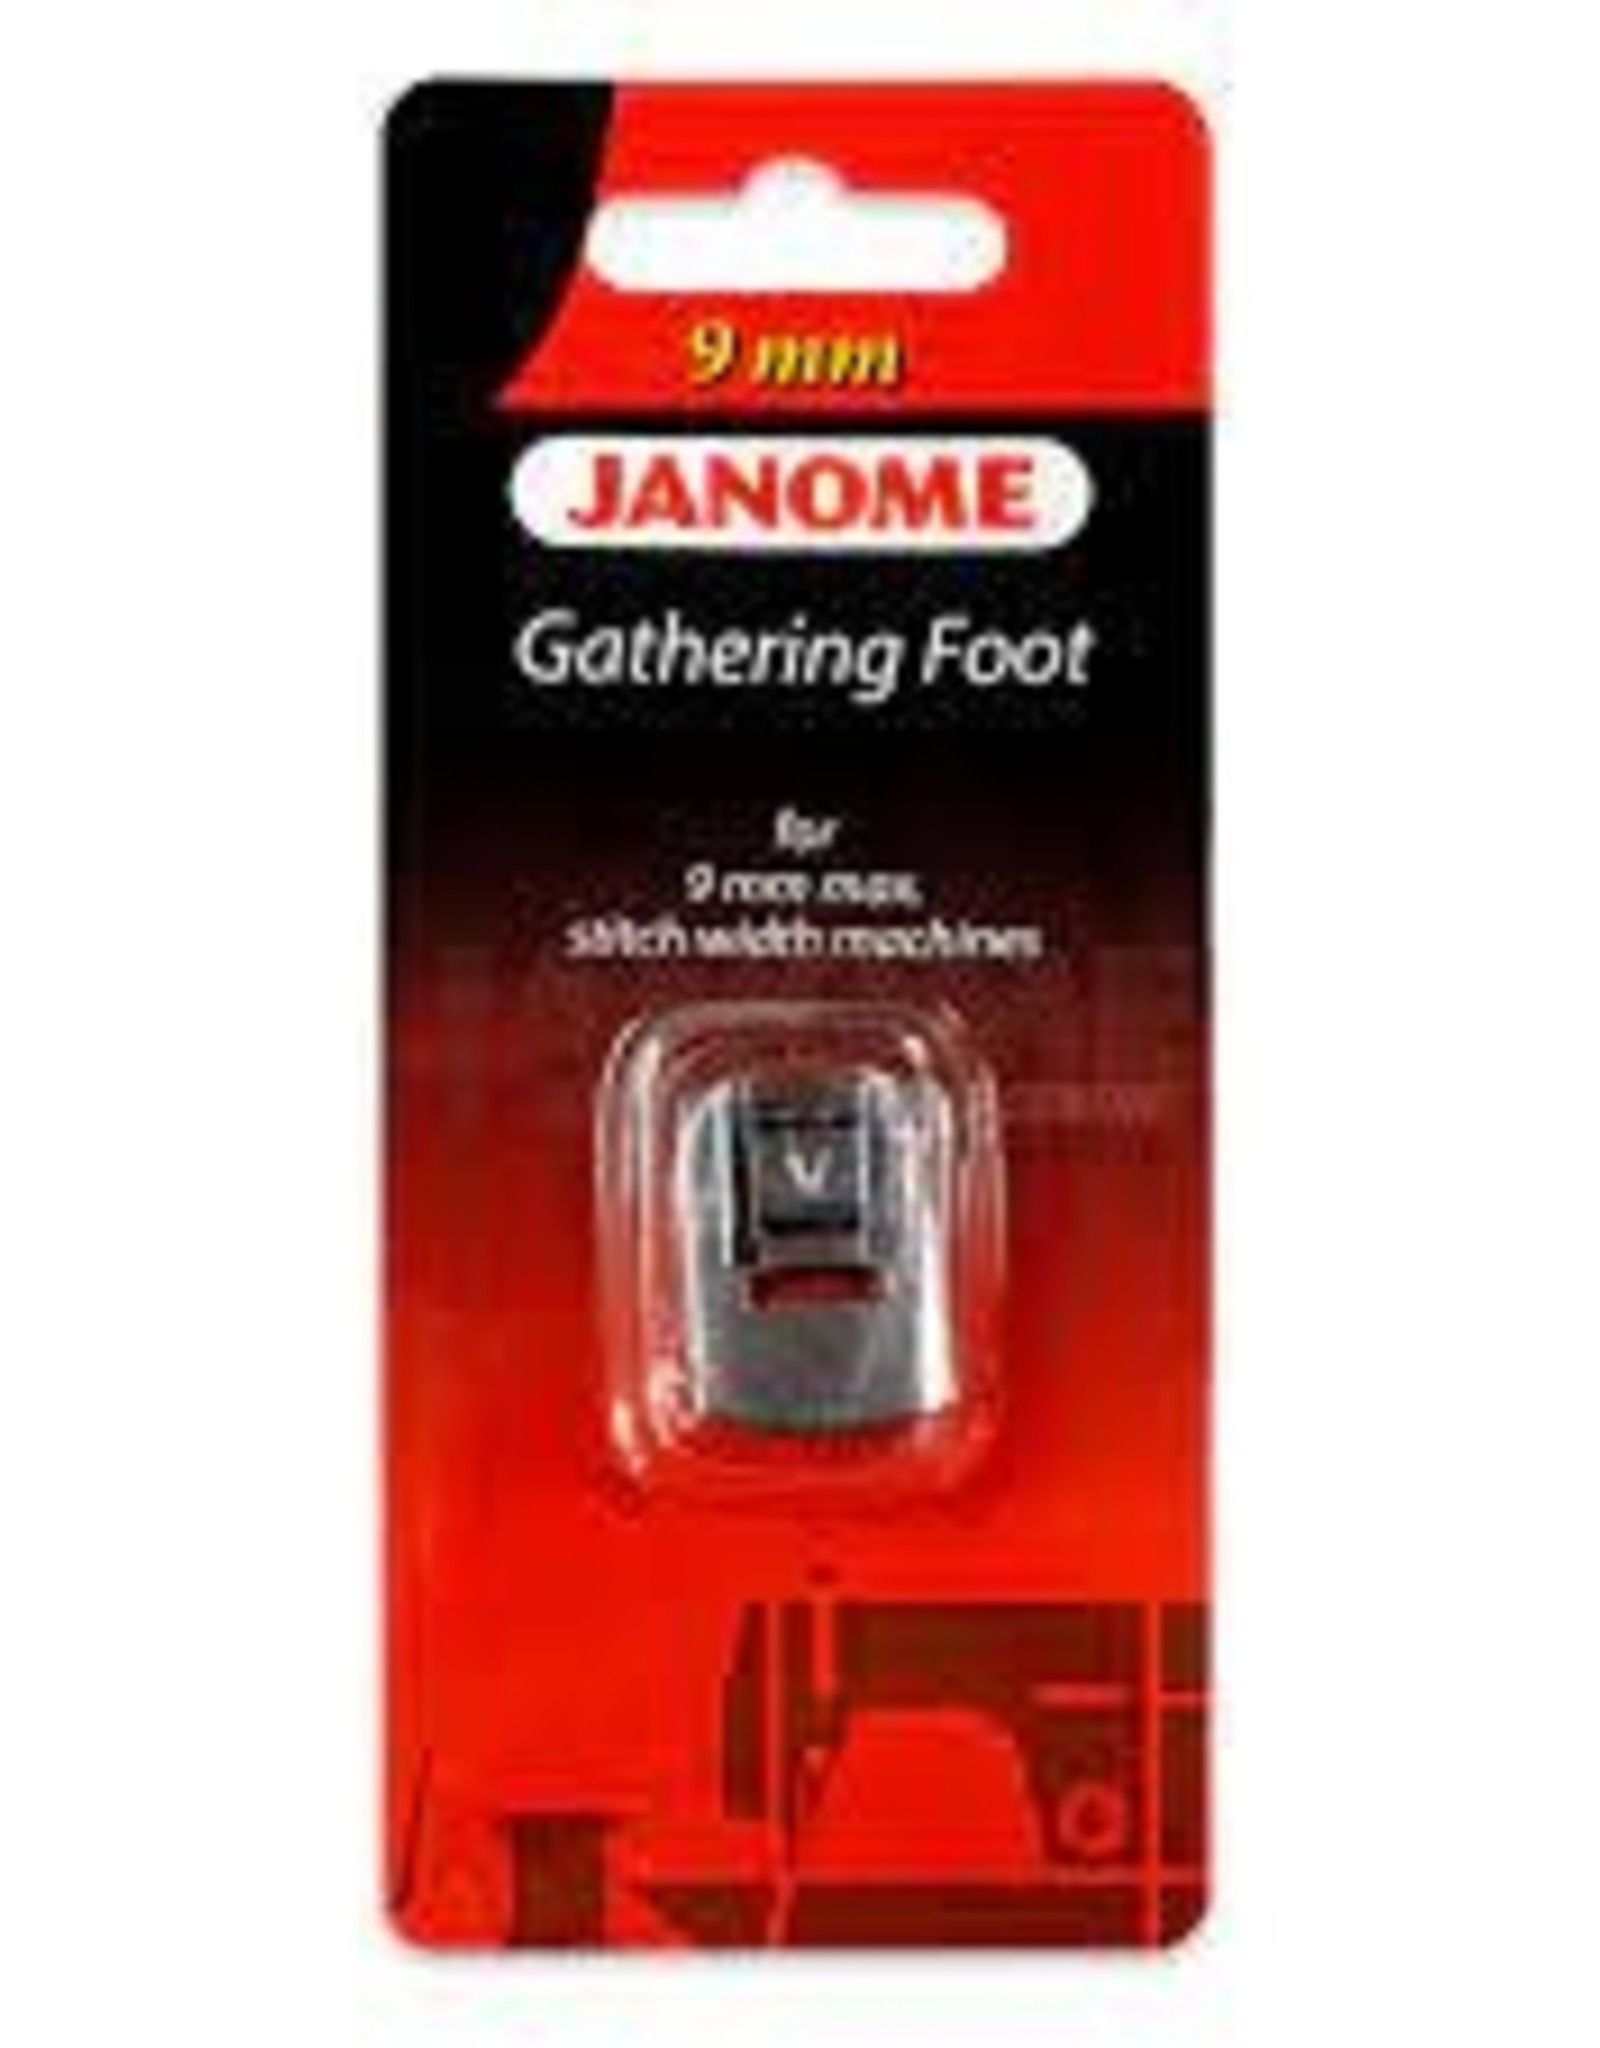 Janome Gathering foot 9mm- 202096005